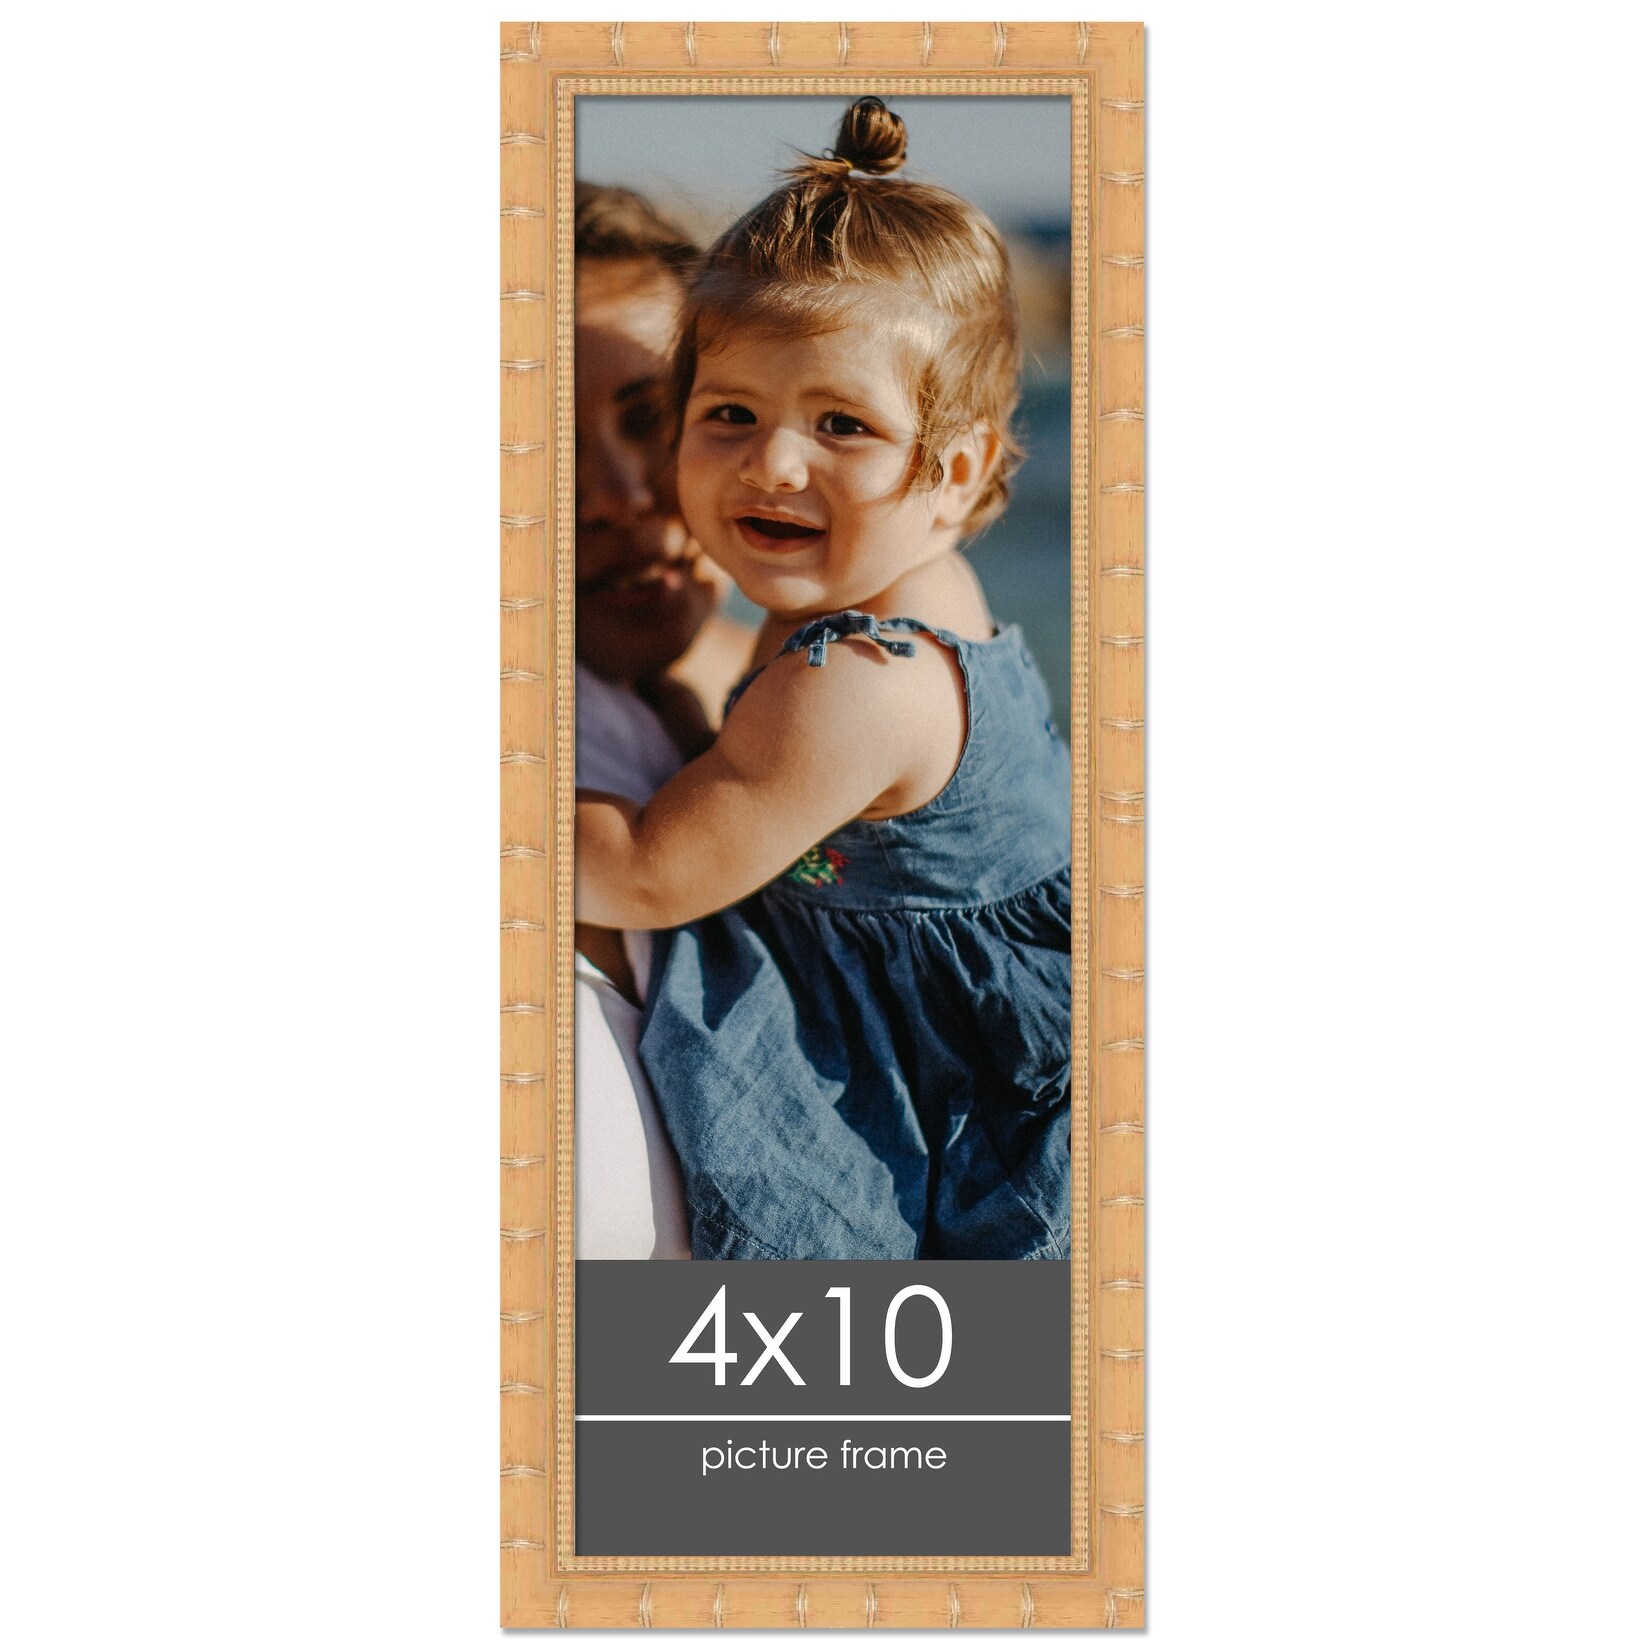 https://ak1.ostkcdn.com/images/products/is/images/direct/1b266bd8b6517c79c0367d8d96d2ac1c2fc22ce9/4x10-Bamboo-Wood-Tone-Complete-Wood-Picture-Frame-with-UV-Acrylic%2C-Foam-Board-Backing%2C-%26-Hardware.jpg